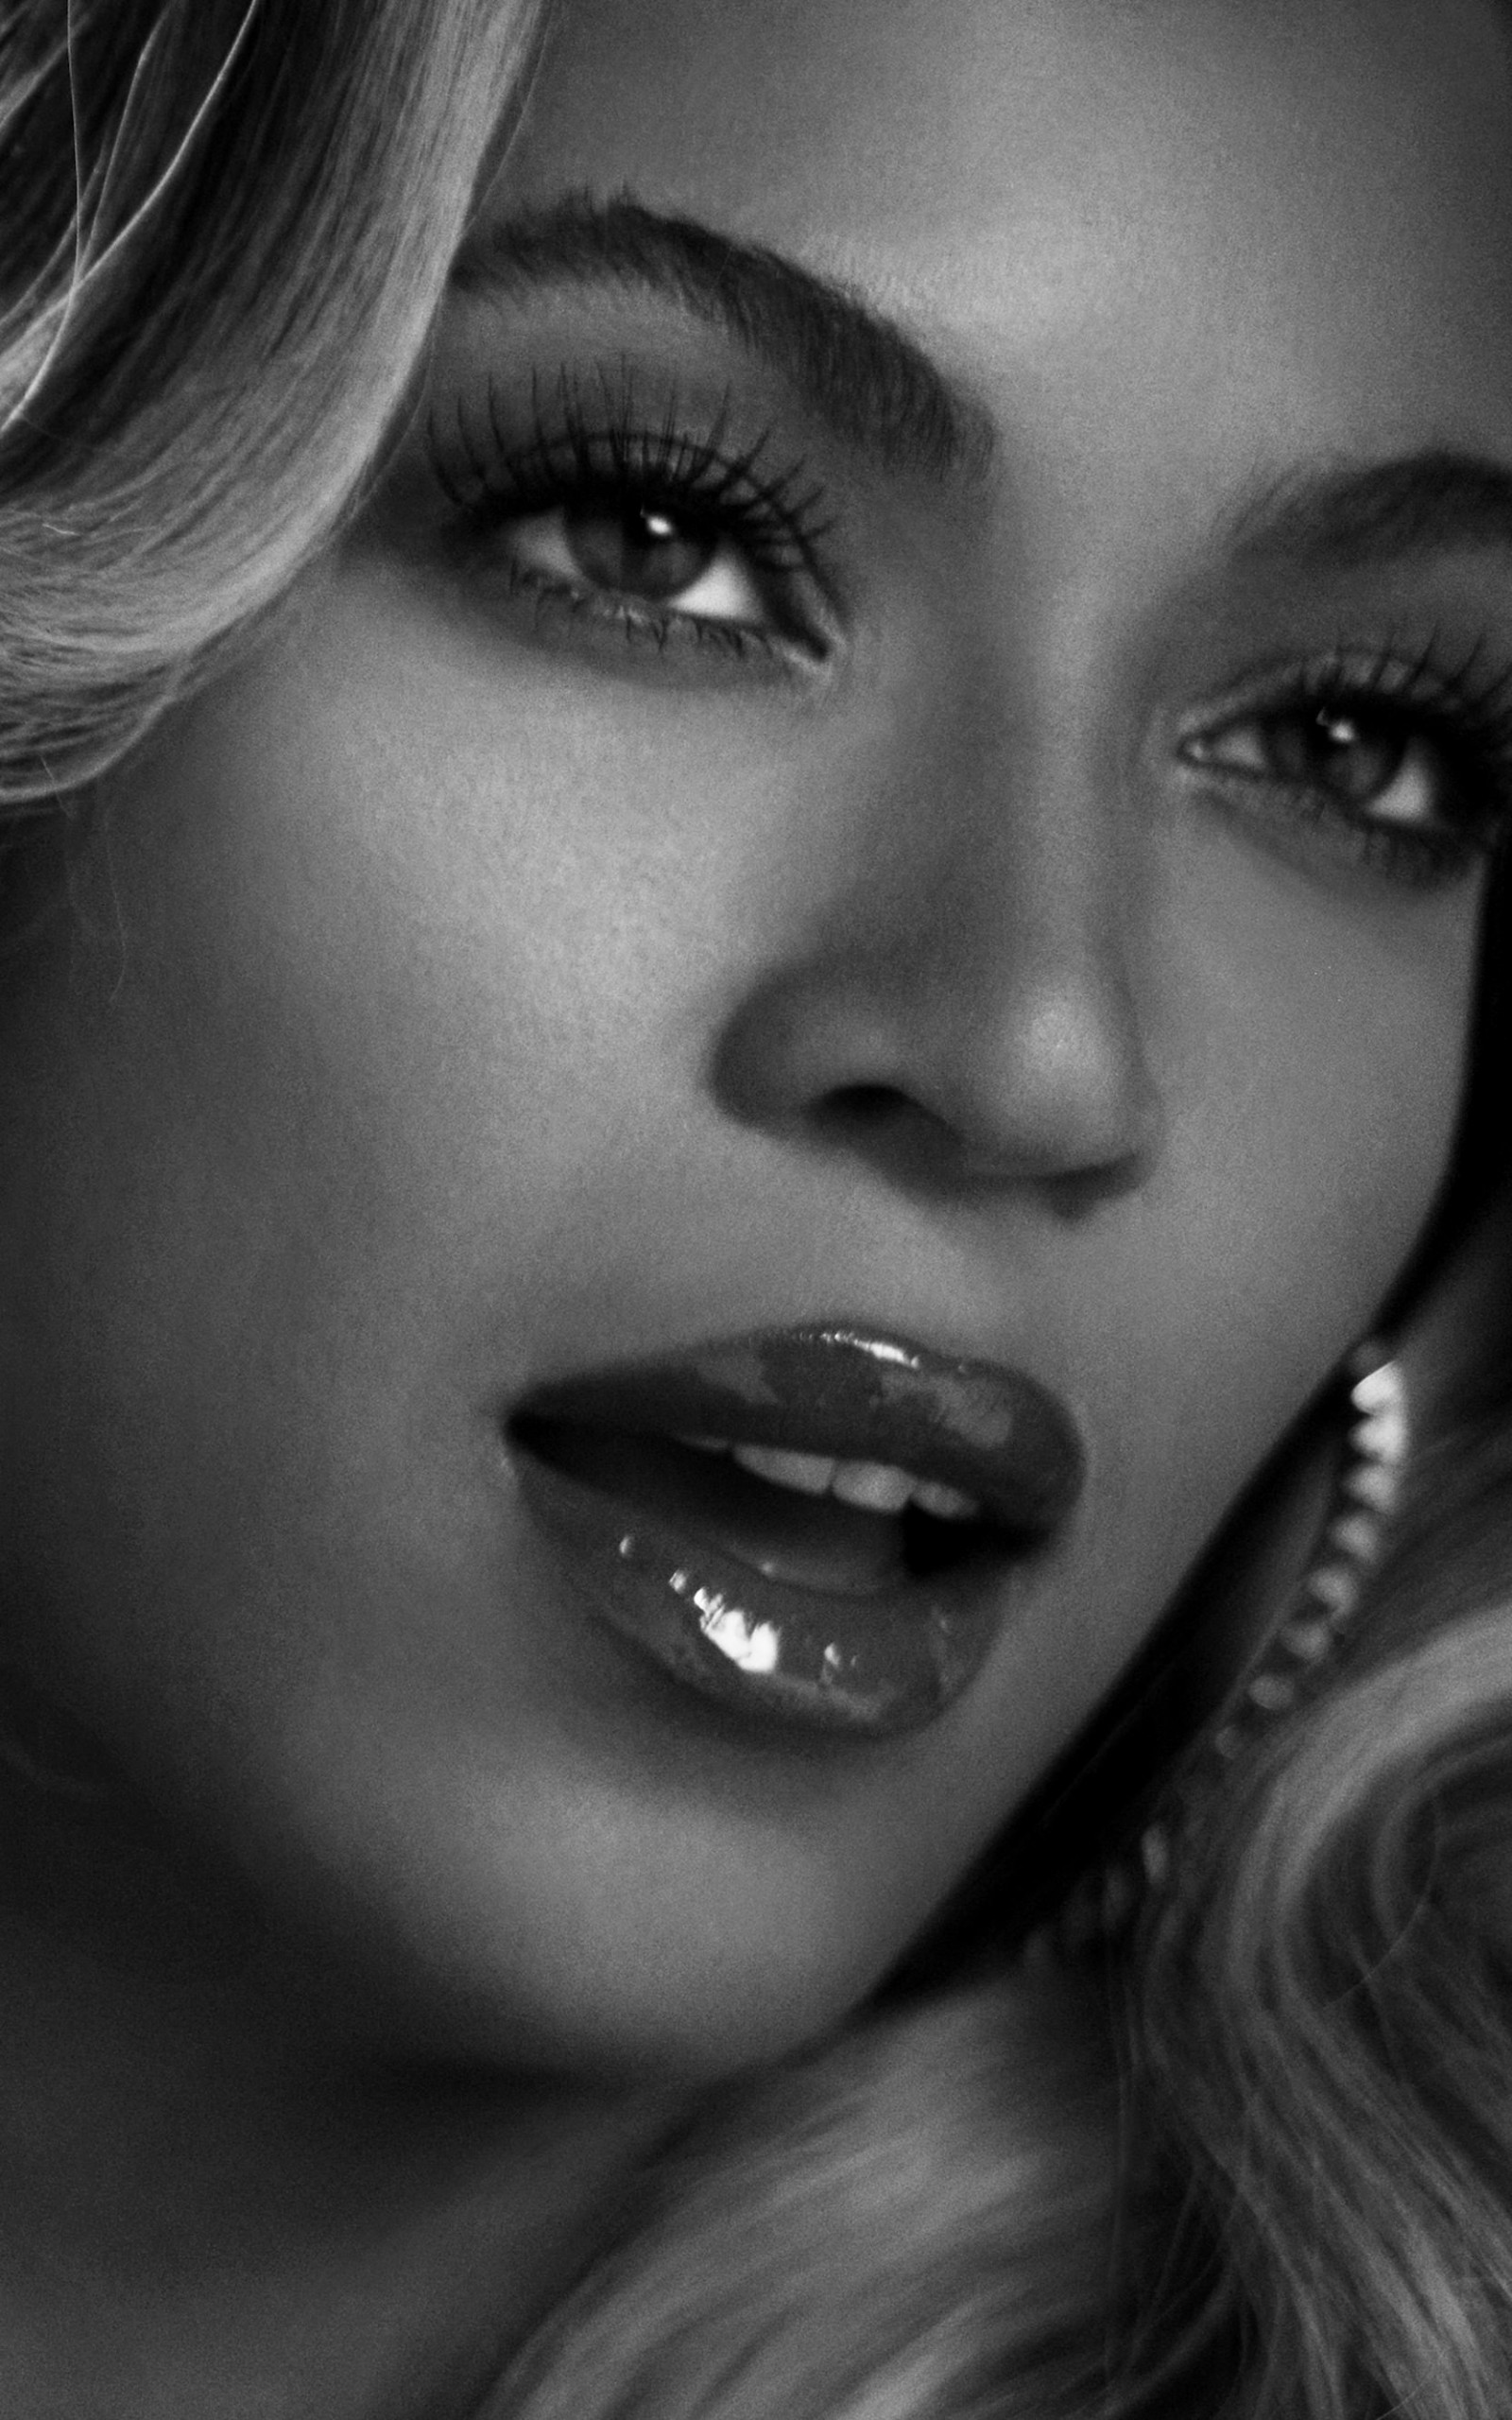 Beyonce in Black & White Wallpaper for Amazon Kindle Fire HDX 8.9